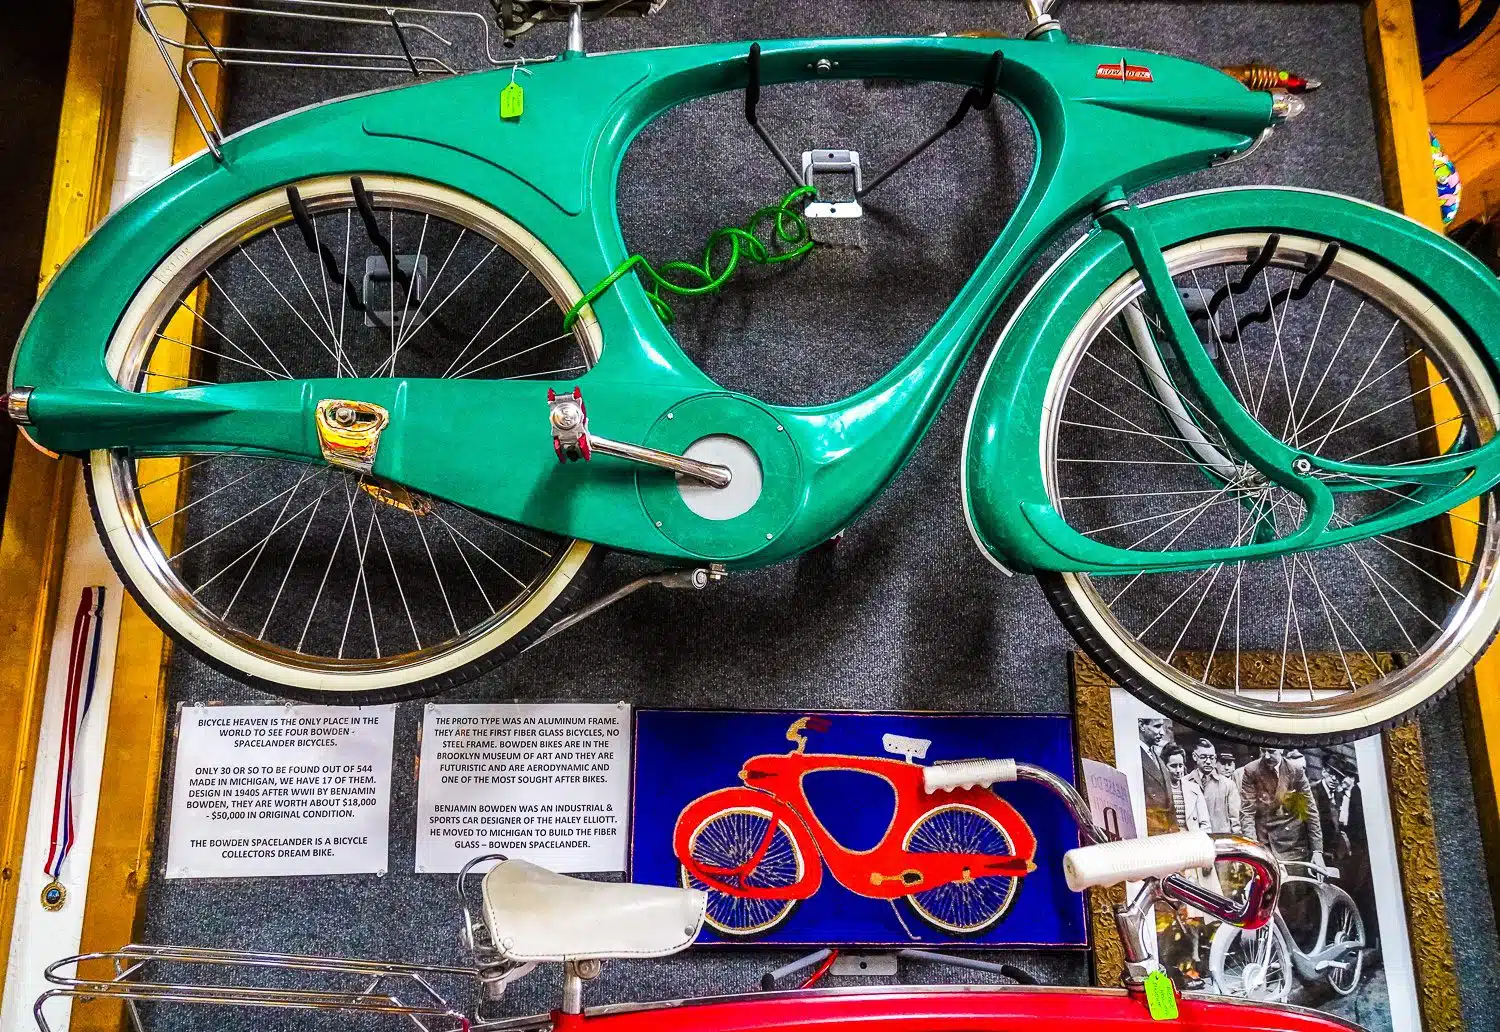 Bowden Spacelander bicycles: Extremely valuable bikes worth around $50,000 each!